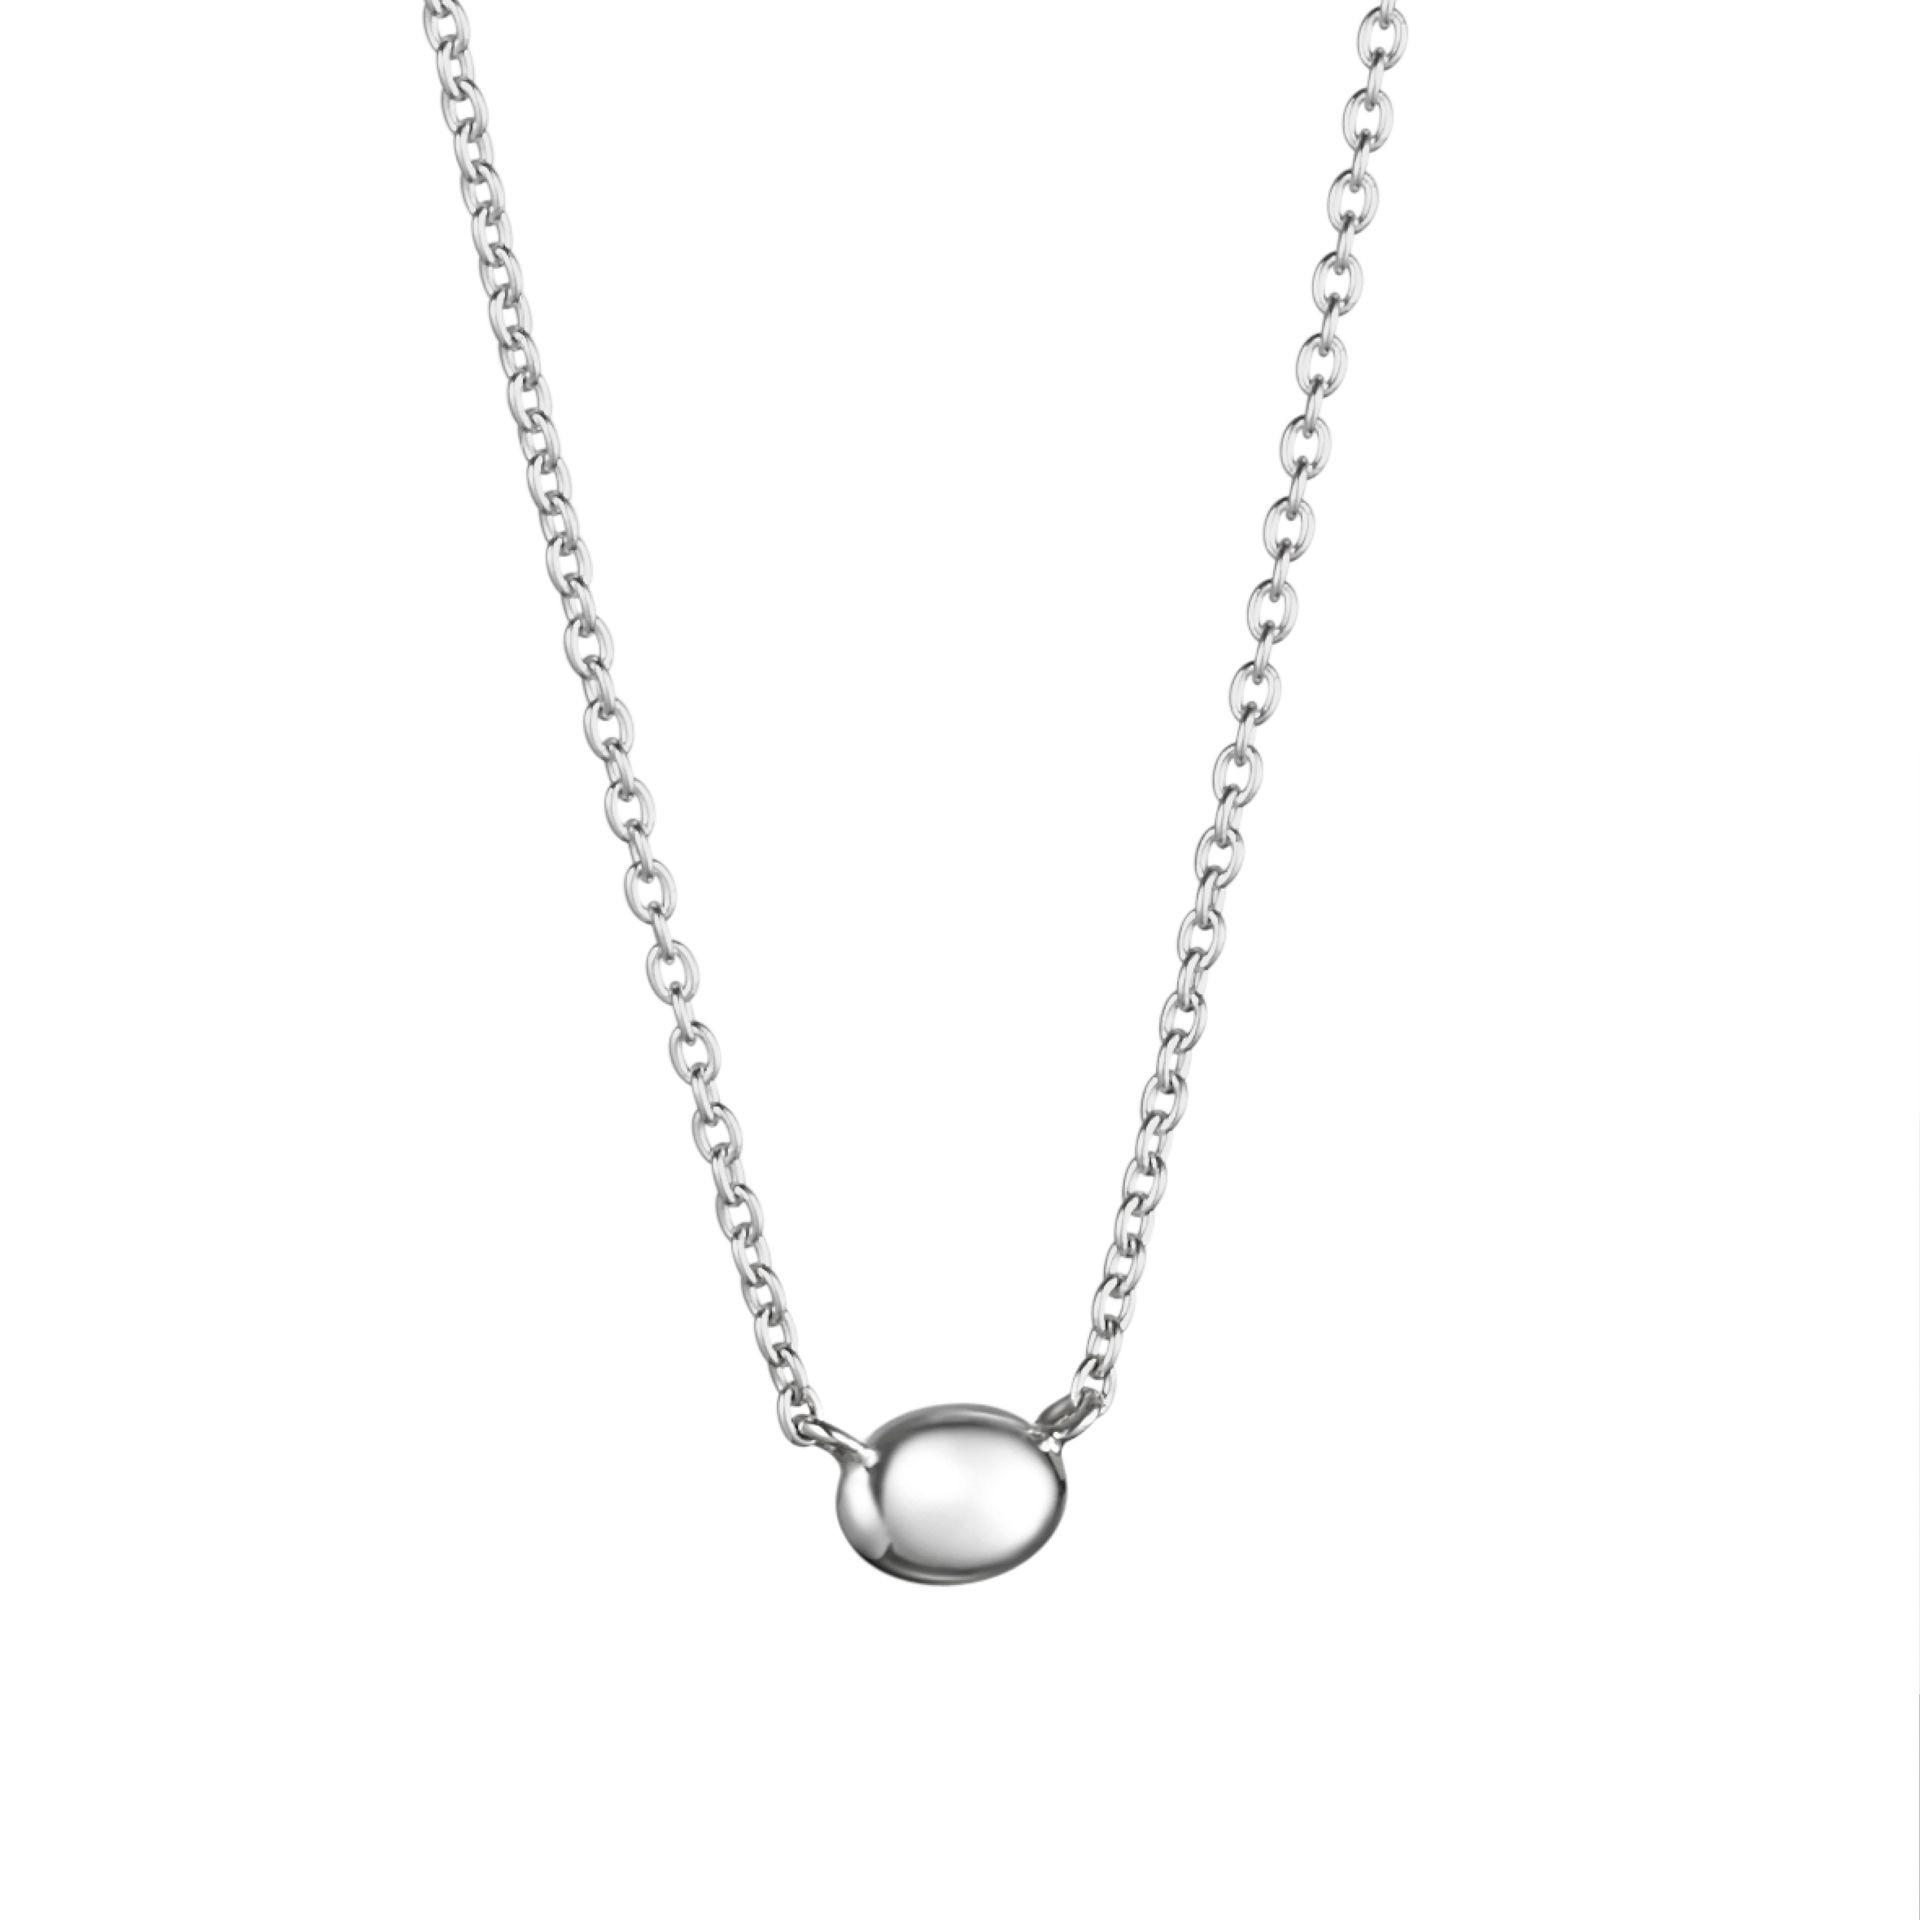 Love Bead Necklace - Silver